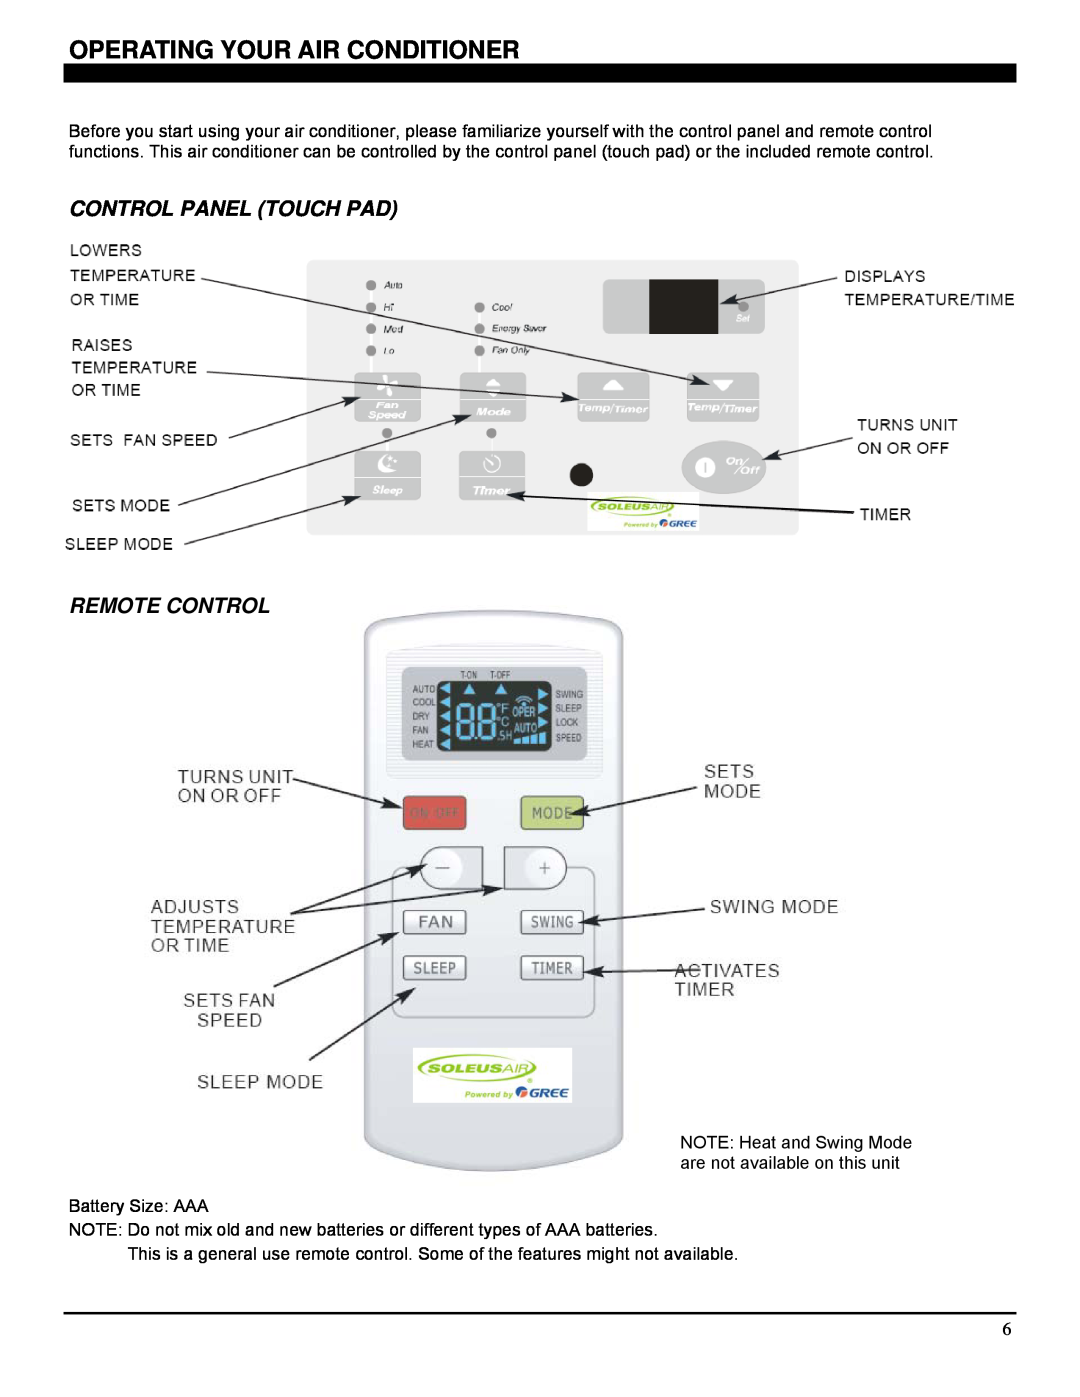 Soleus Air SG-TTW-10ESE manual Operating Your Air Conditioner, Control Panel Touch Pad Remote Control 